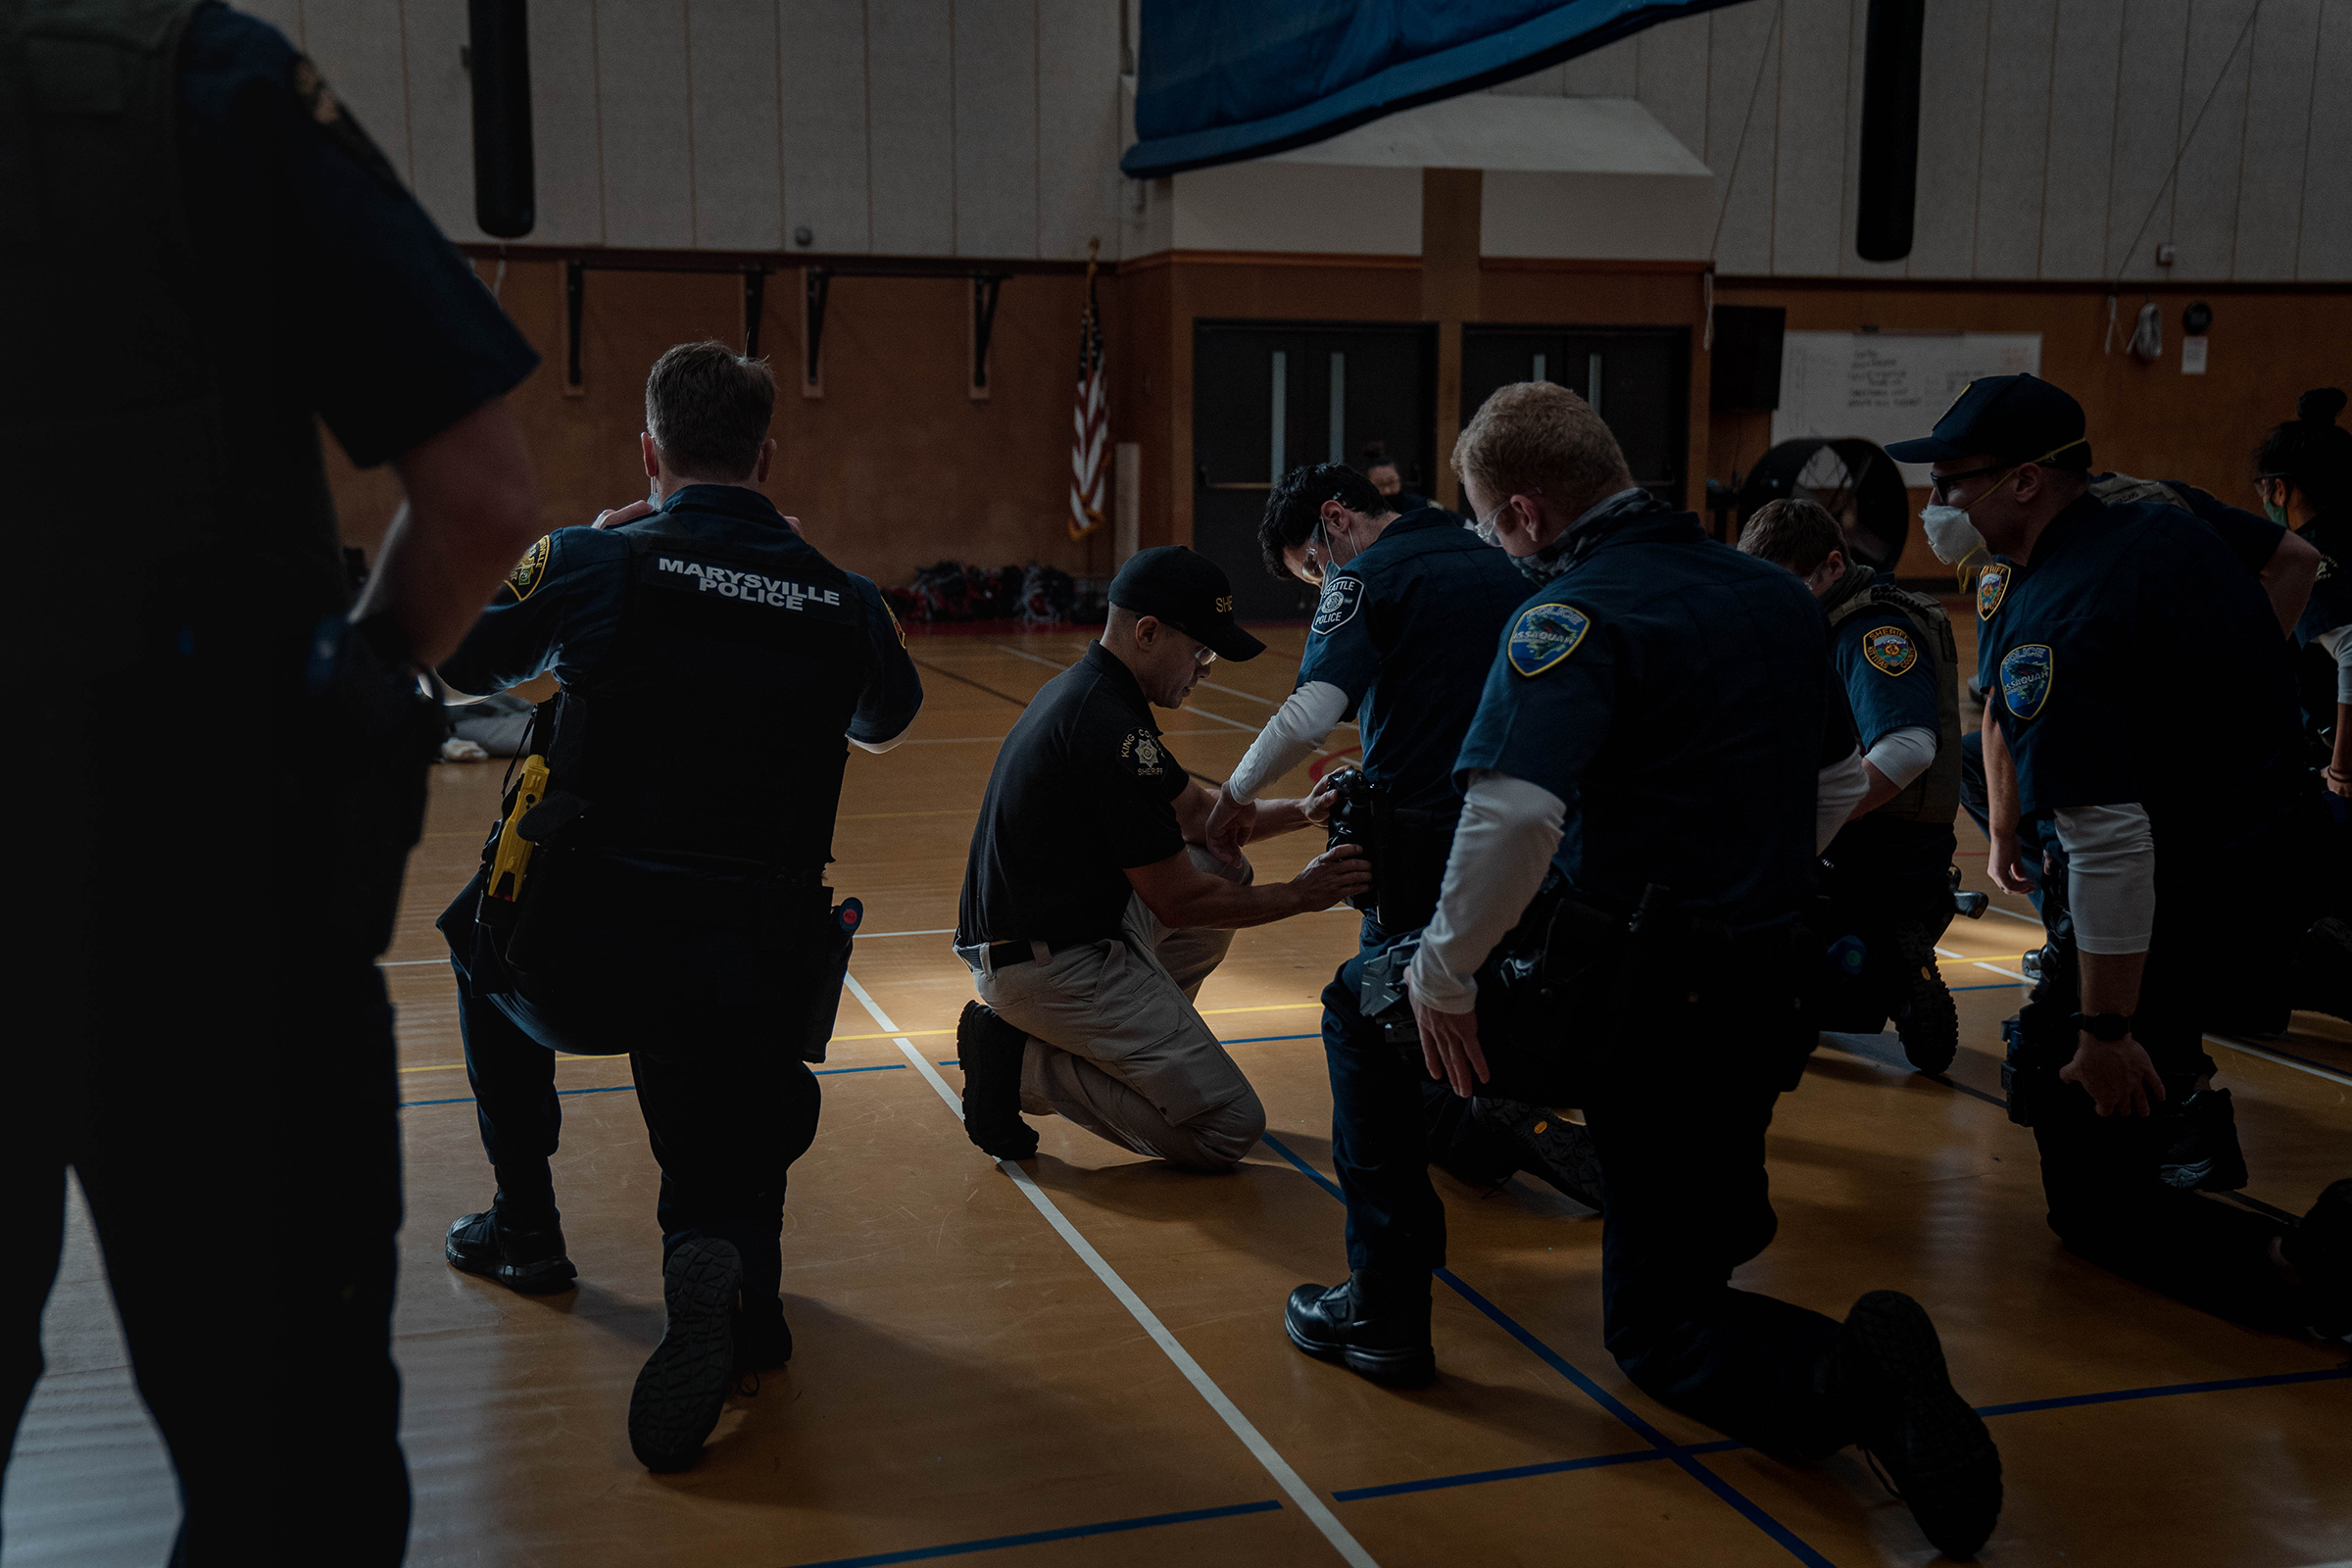 Police recruits practice holstering a taser at an introductory taser class. (Jovelle Tamayo for TIME)